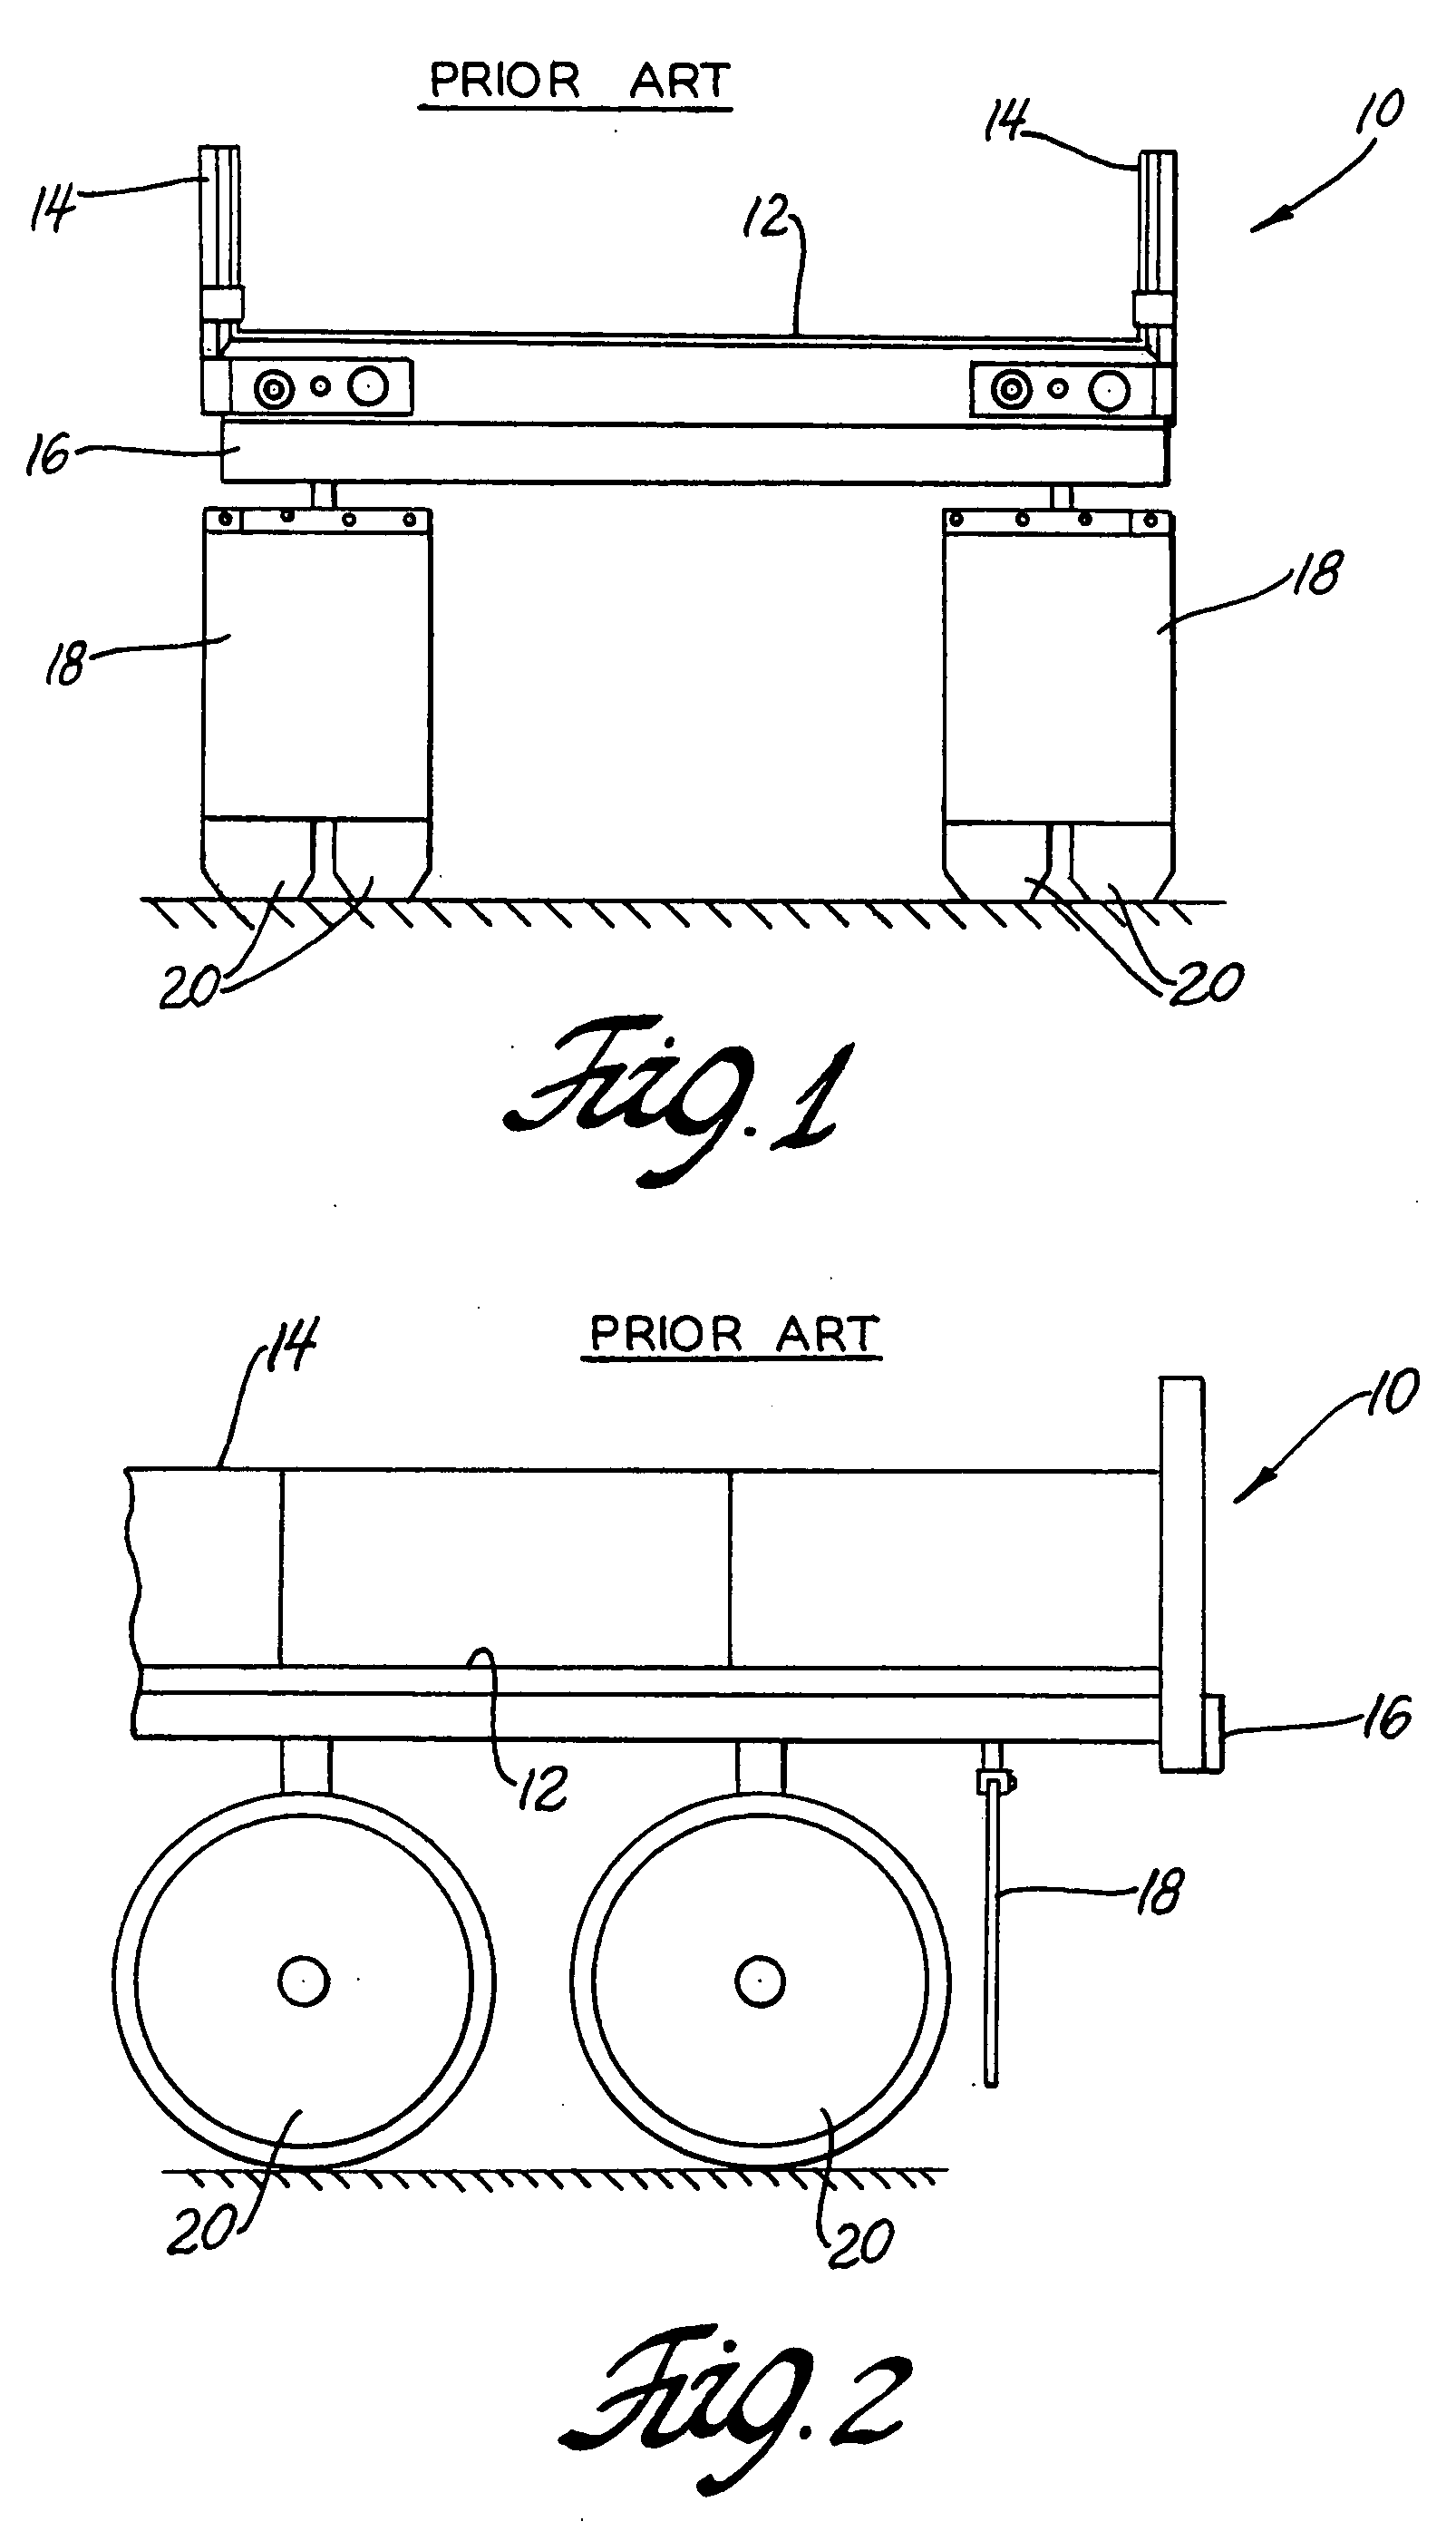 Combination rear impact guard, ladder, and ramp for military cargo vehicles